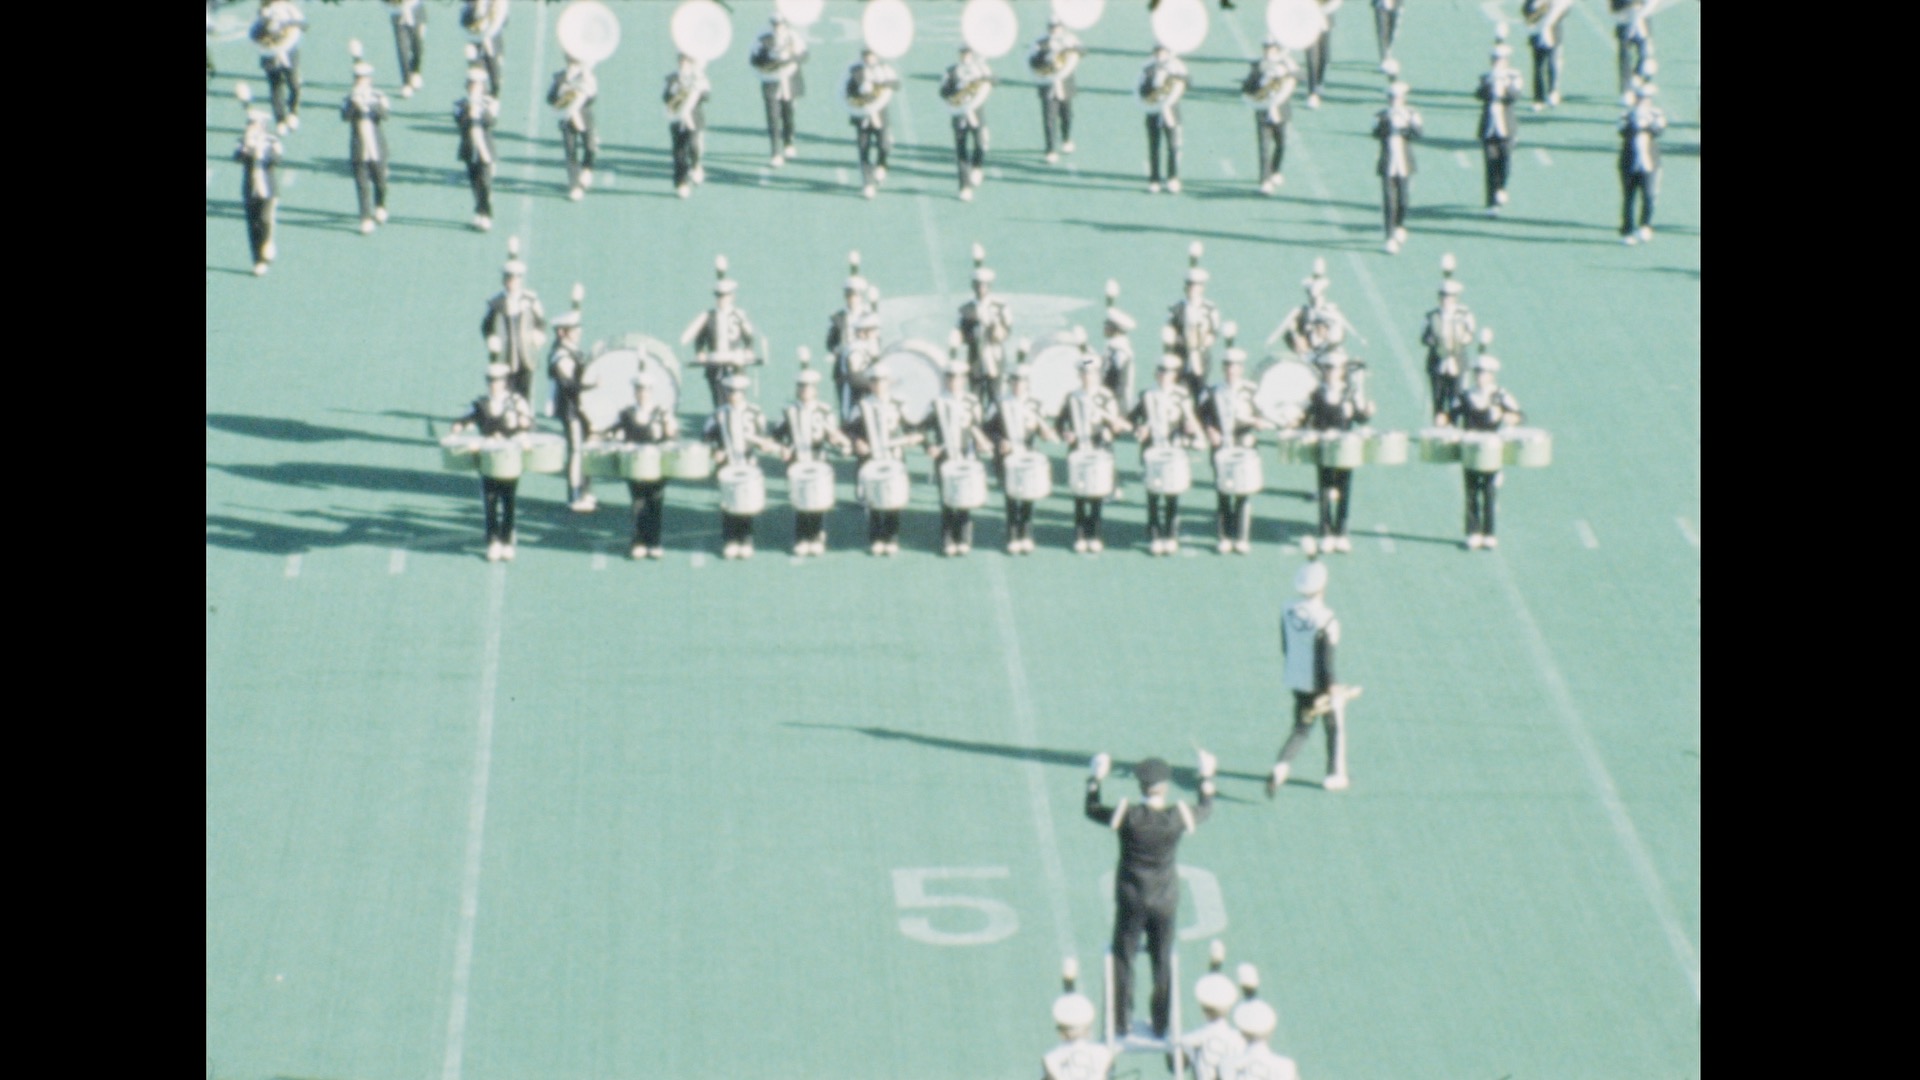 Spartan Marching Band: Corps Style | MSU vs. Northwestern, 1975